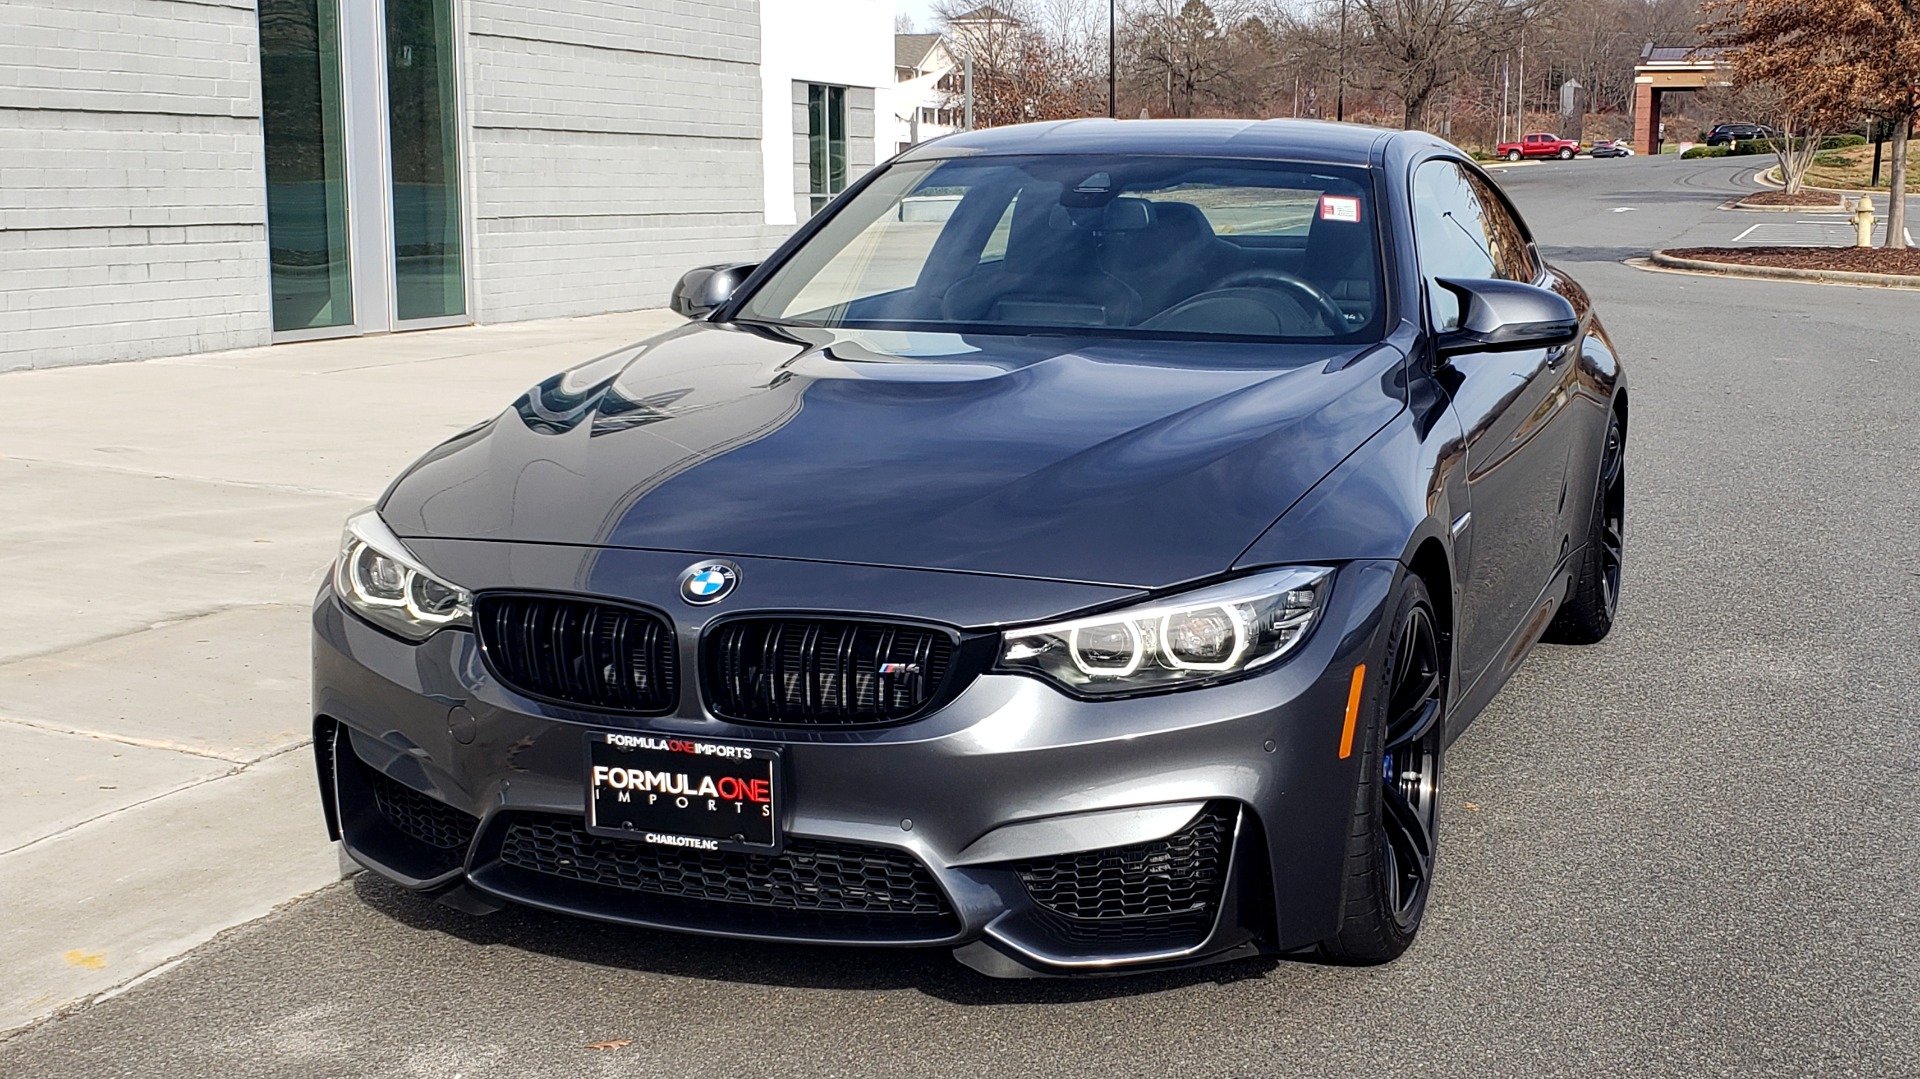 Used 2019 BMW M4 COUPE 3.0L 425HP / 7-SPD AUTO / NAV / 19-IN WHEELS / REARVIEW for sale $67,999 at Formula Imports in Charlotte NC 28227 3